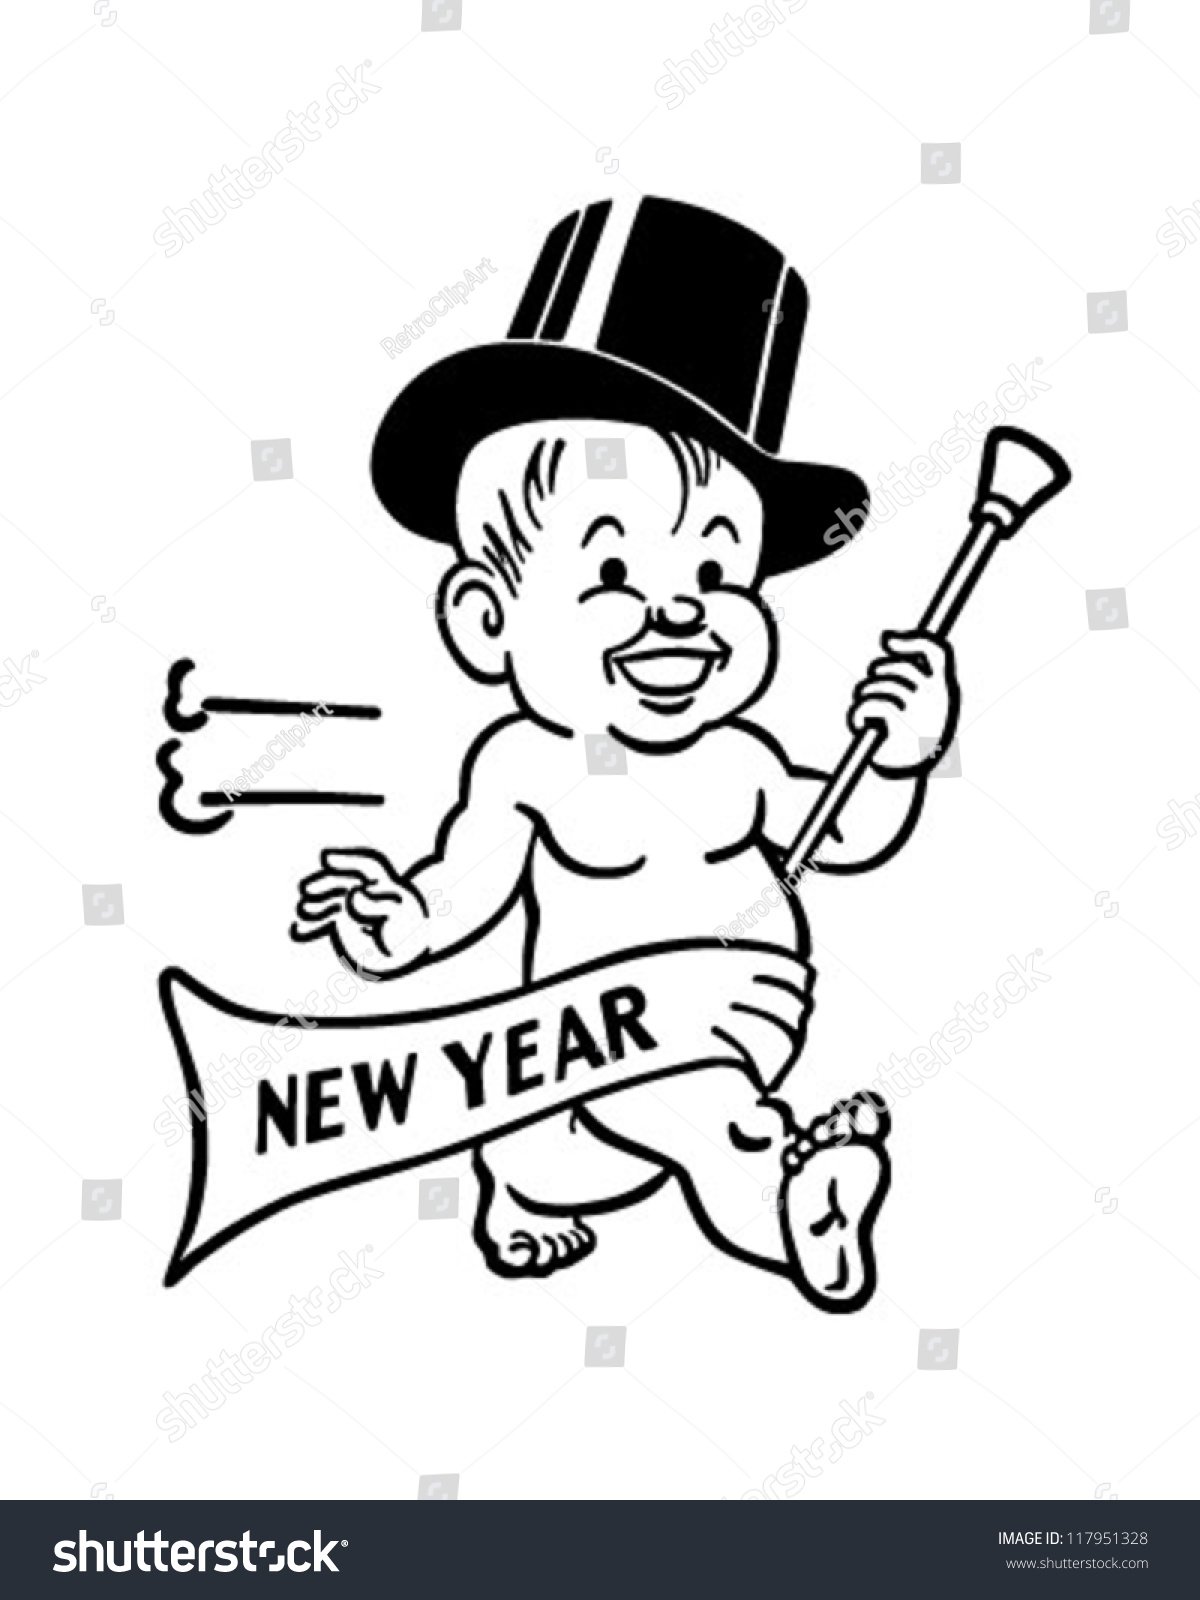 new year baby clipart - photo #13